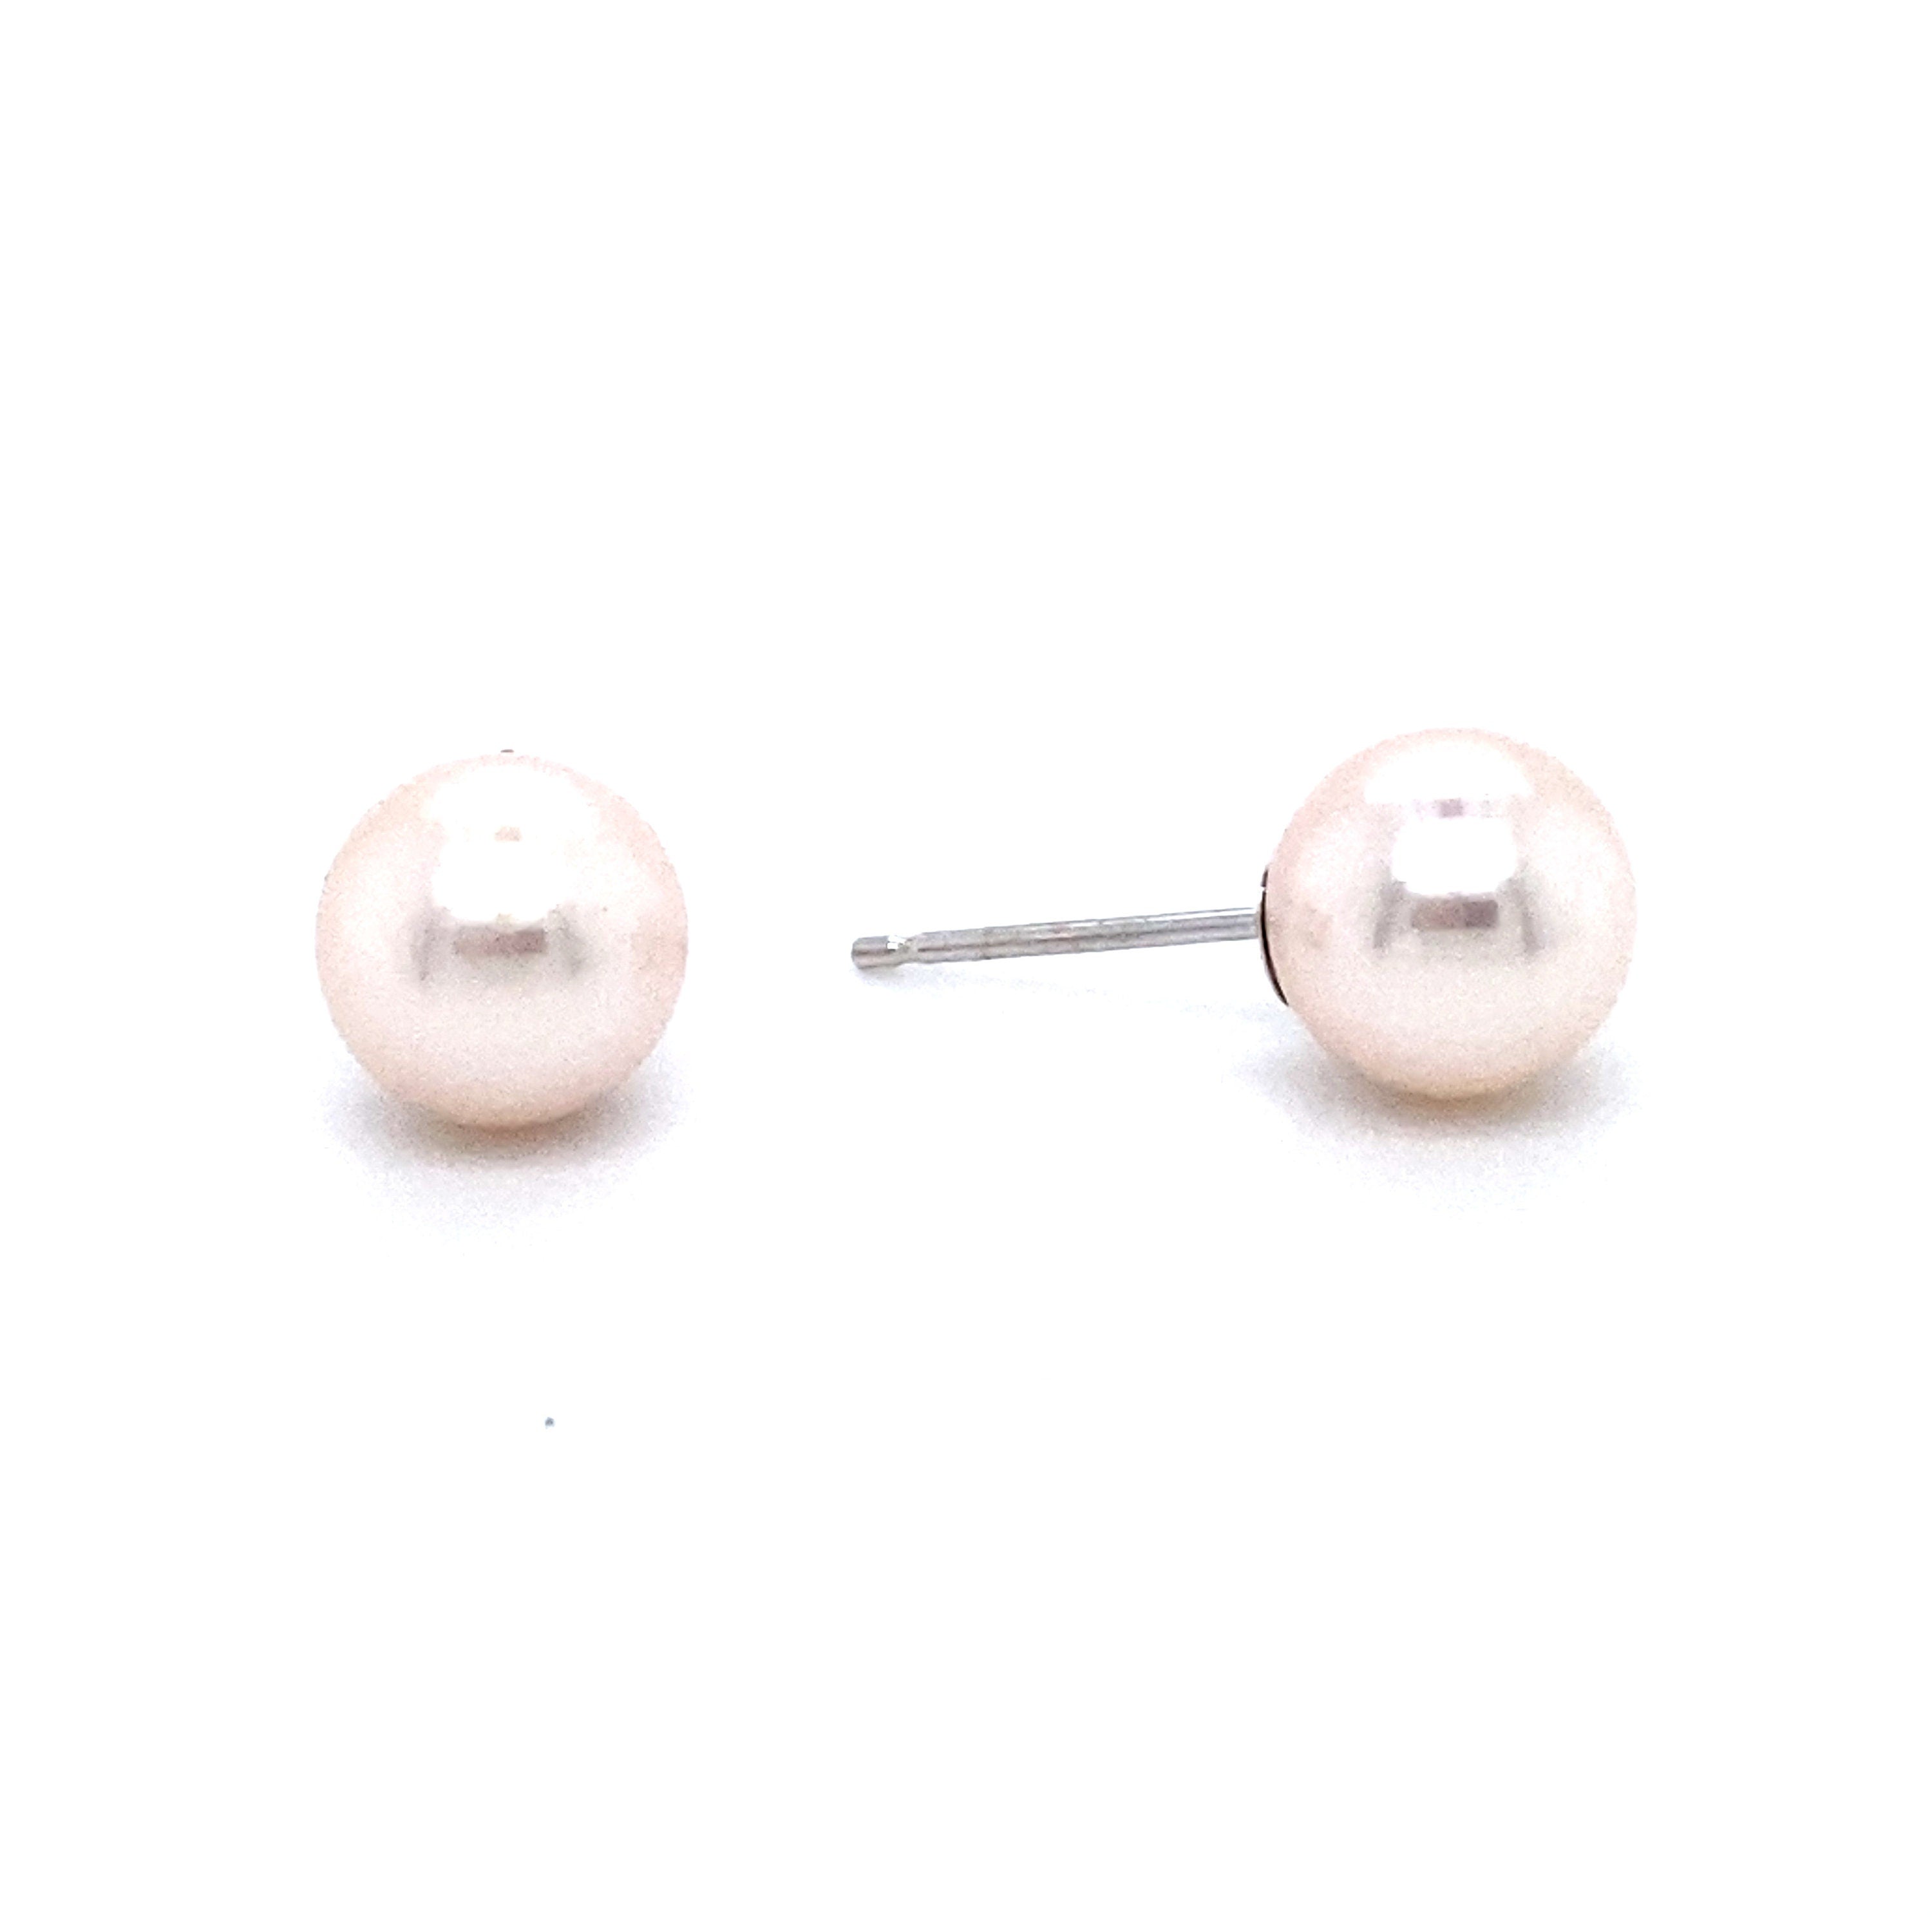 Classic Akoya Pearl Stud Earrings with Solid 14K White Gold Post and Back, 7mm.